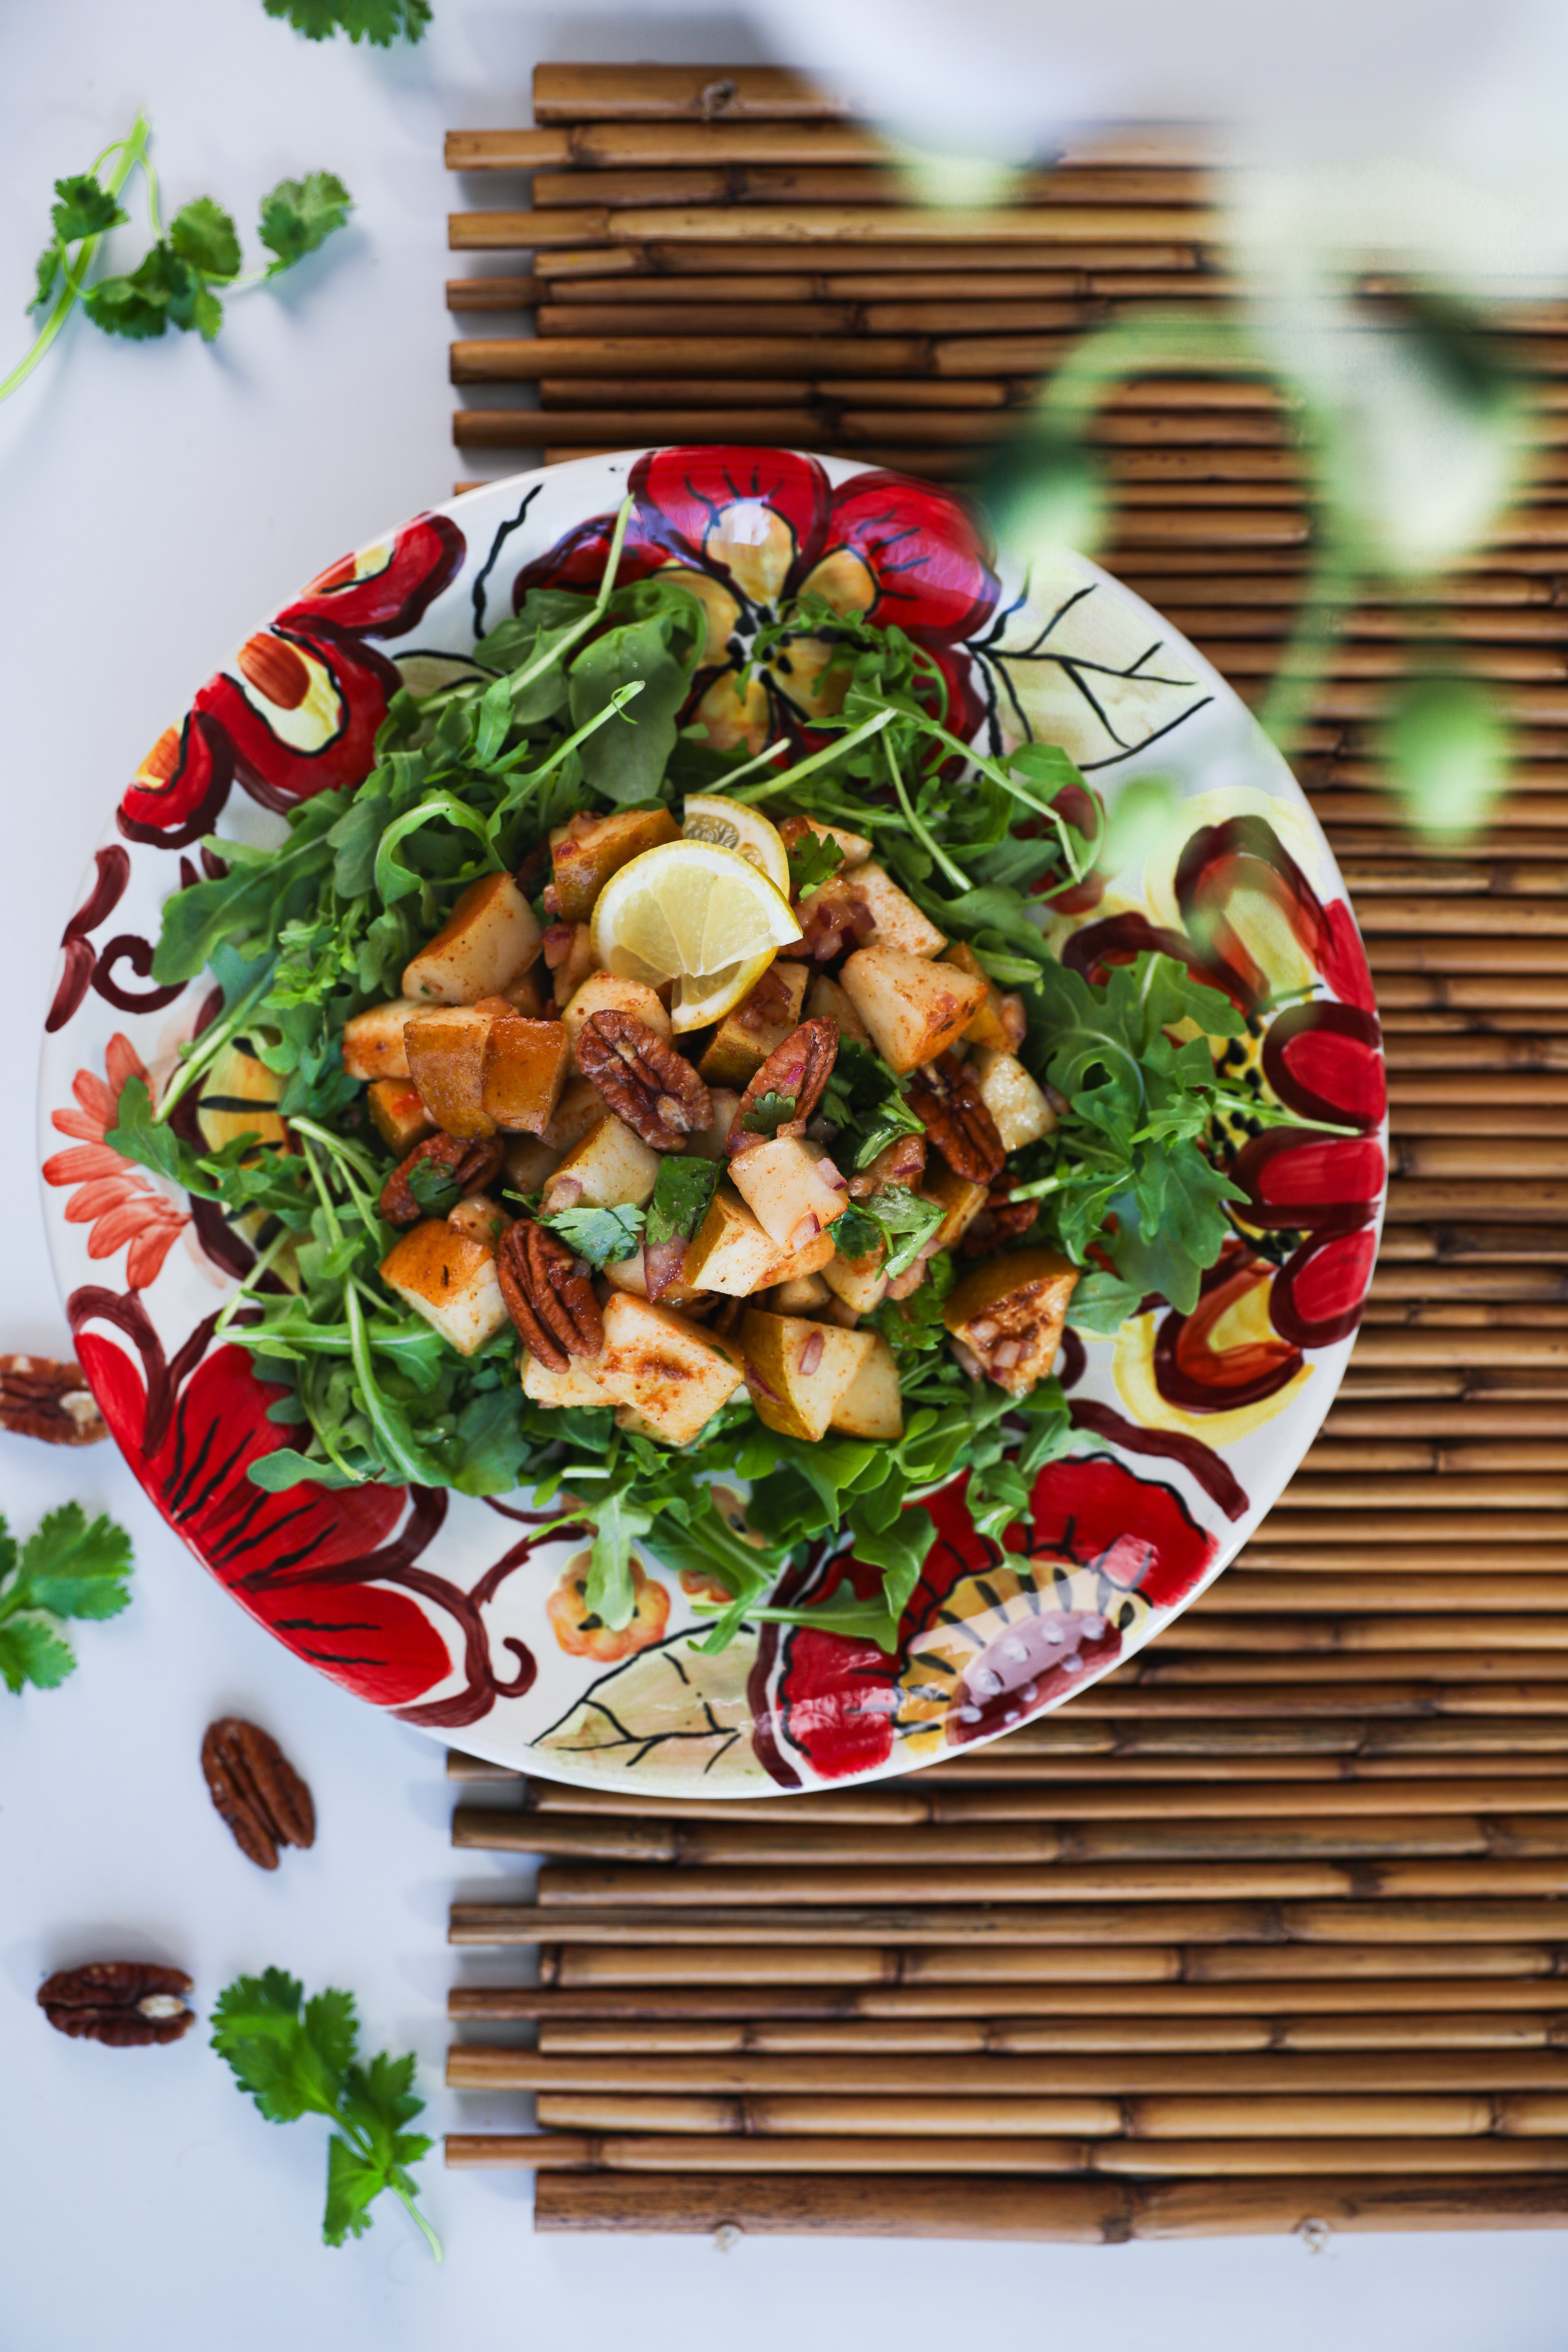 Pecan and pear salad arranged atop a bed of rocket (arugula), garnished with cilantro, pecans and lemon slices, served on a floral-printed plate.